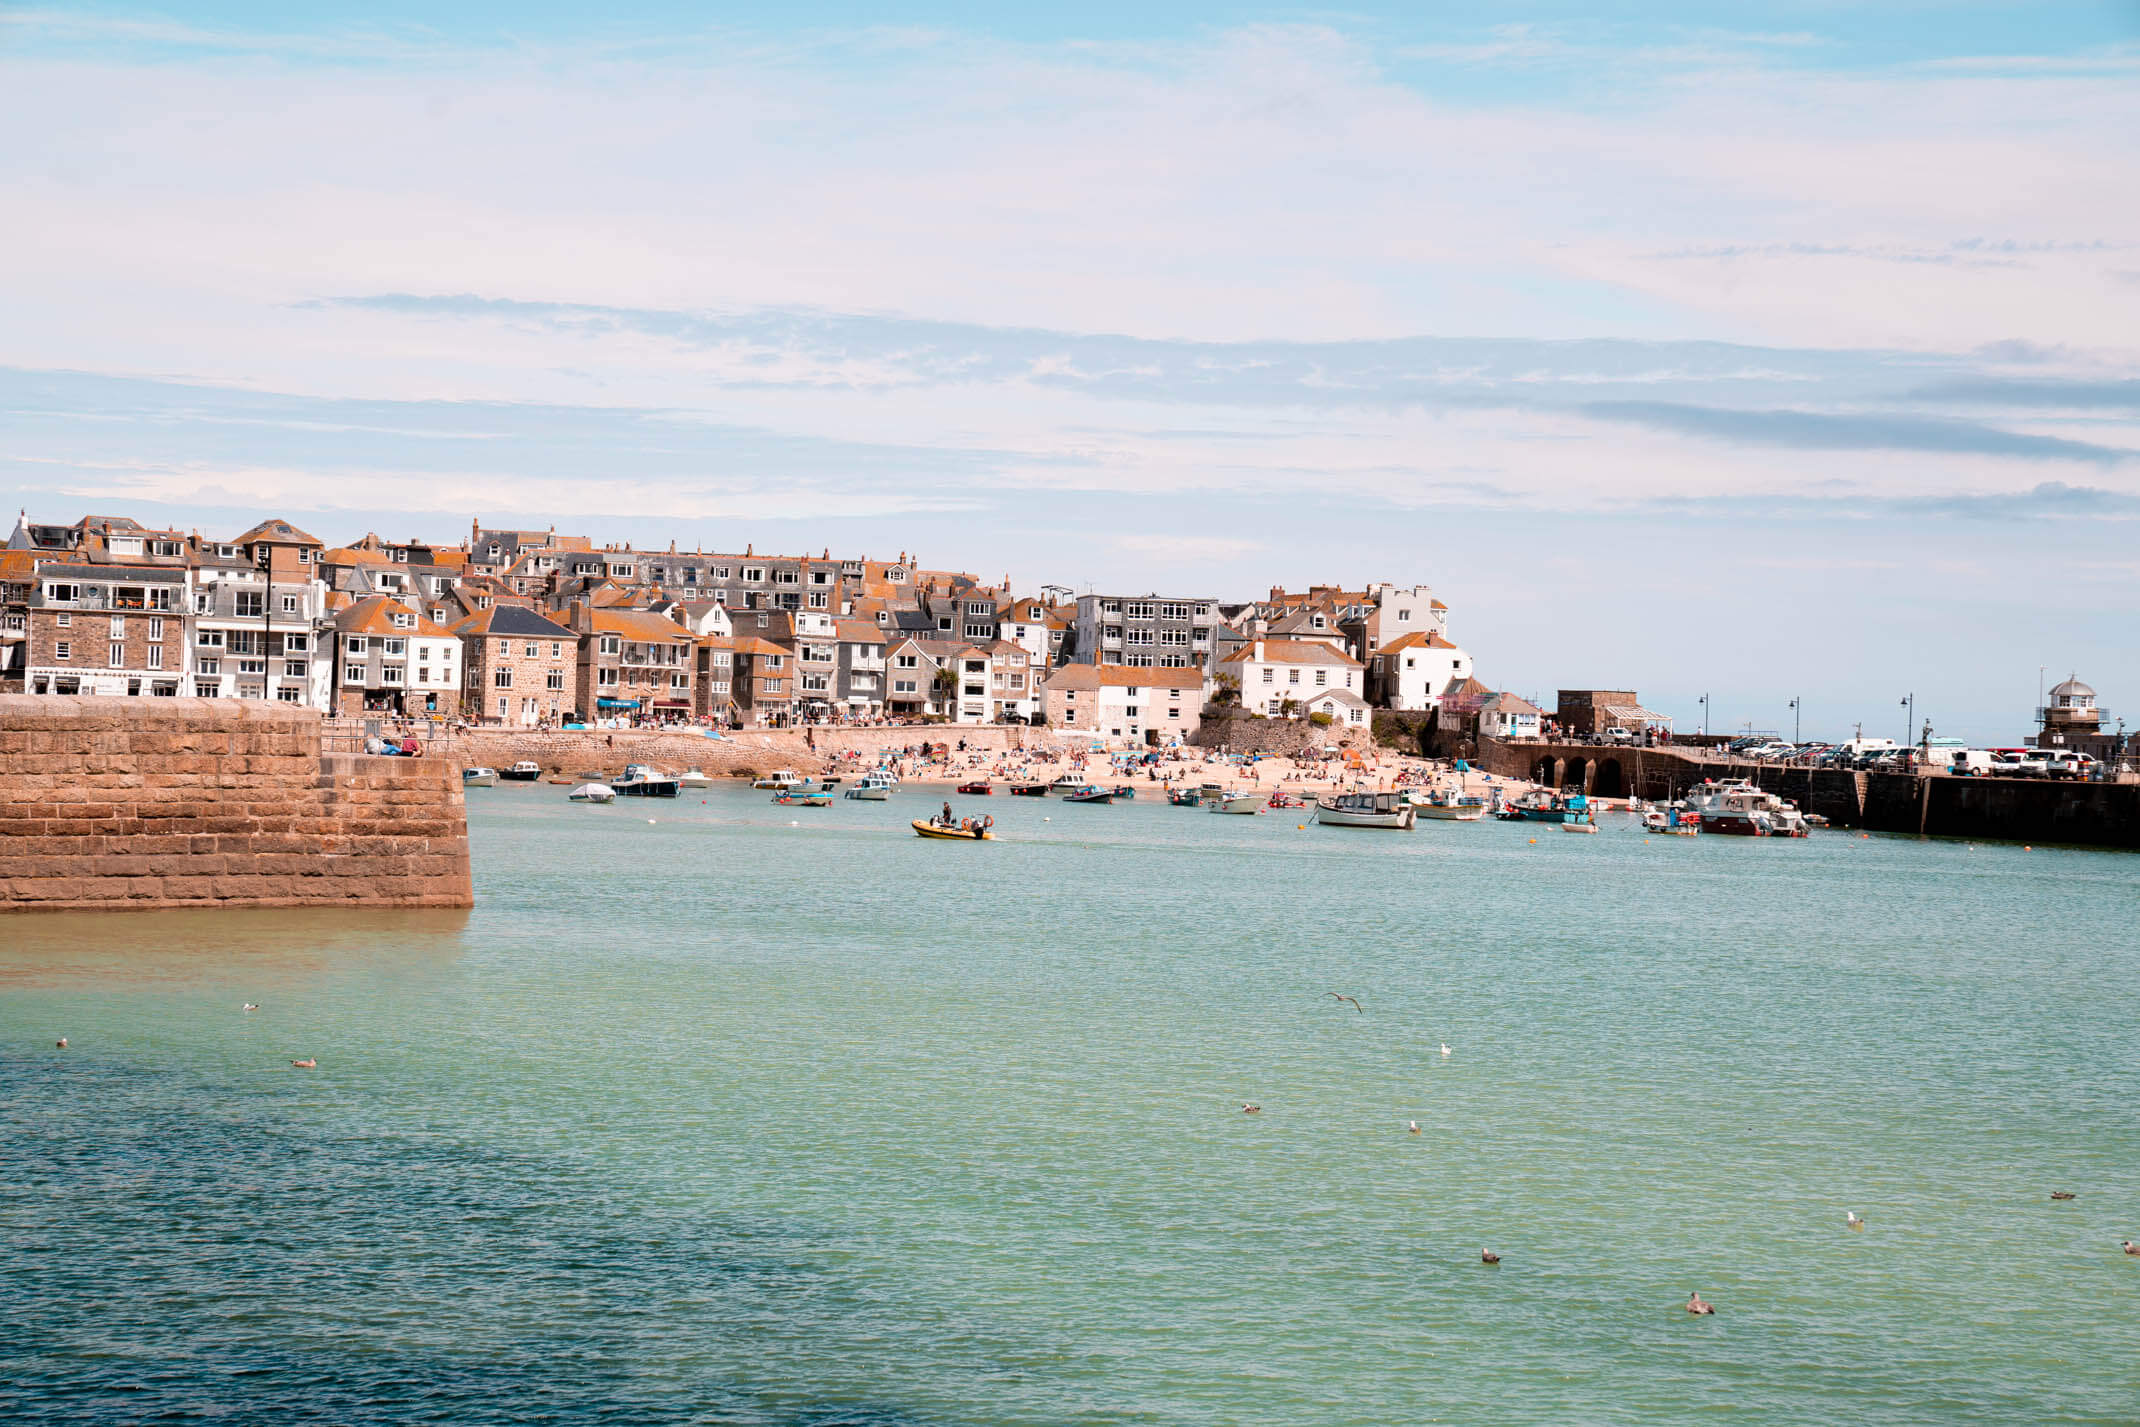 St.Ives: A guide to the most beautiful beaches in Cornwall, England